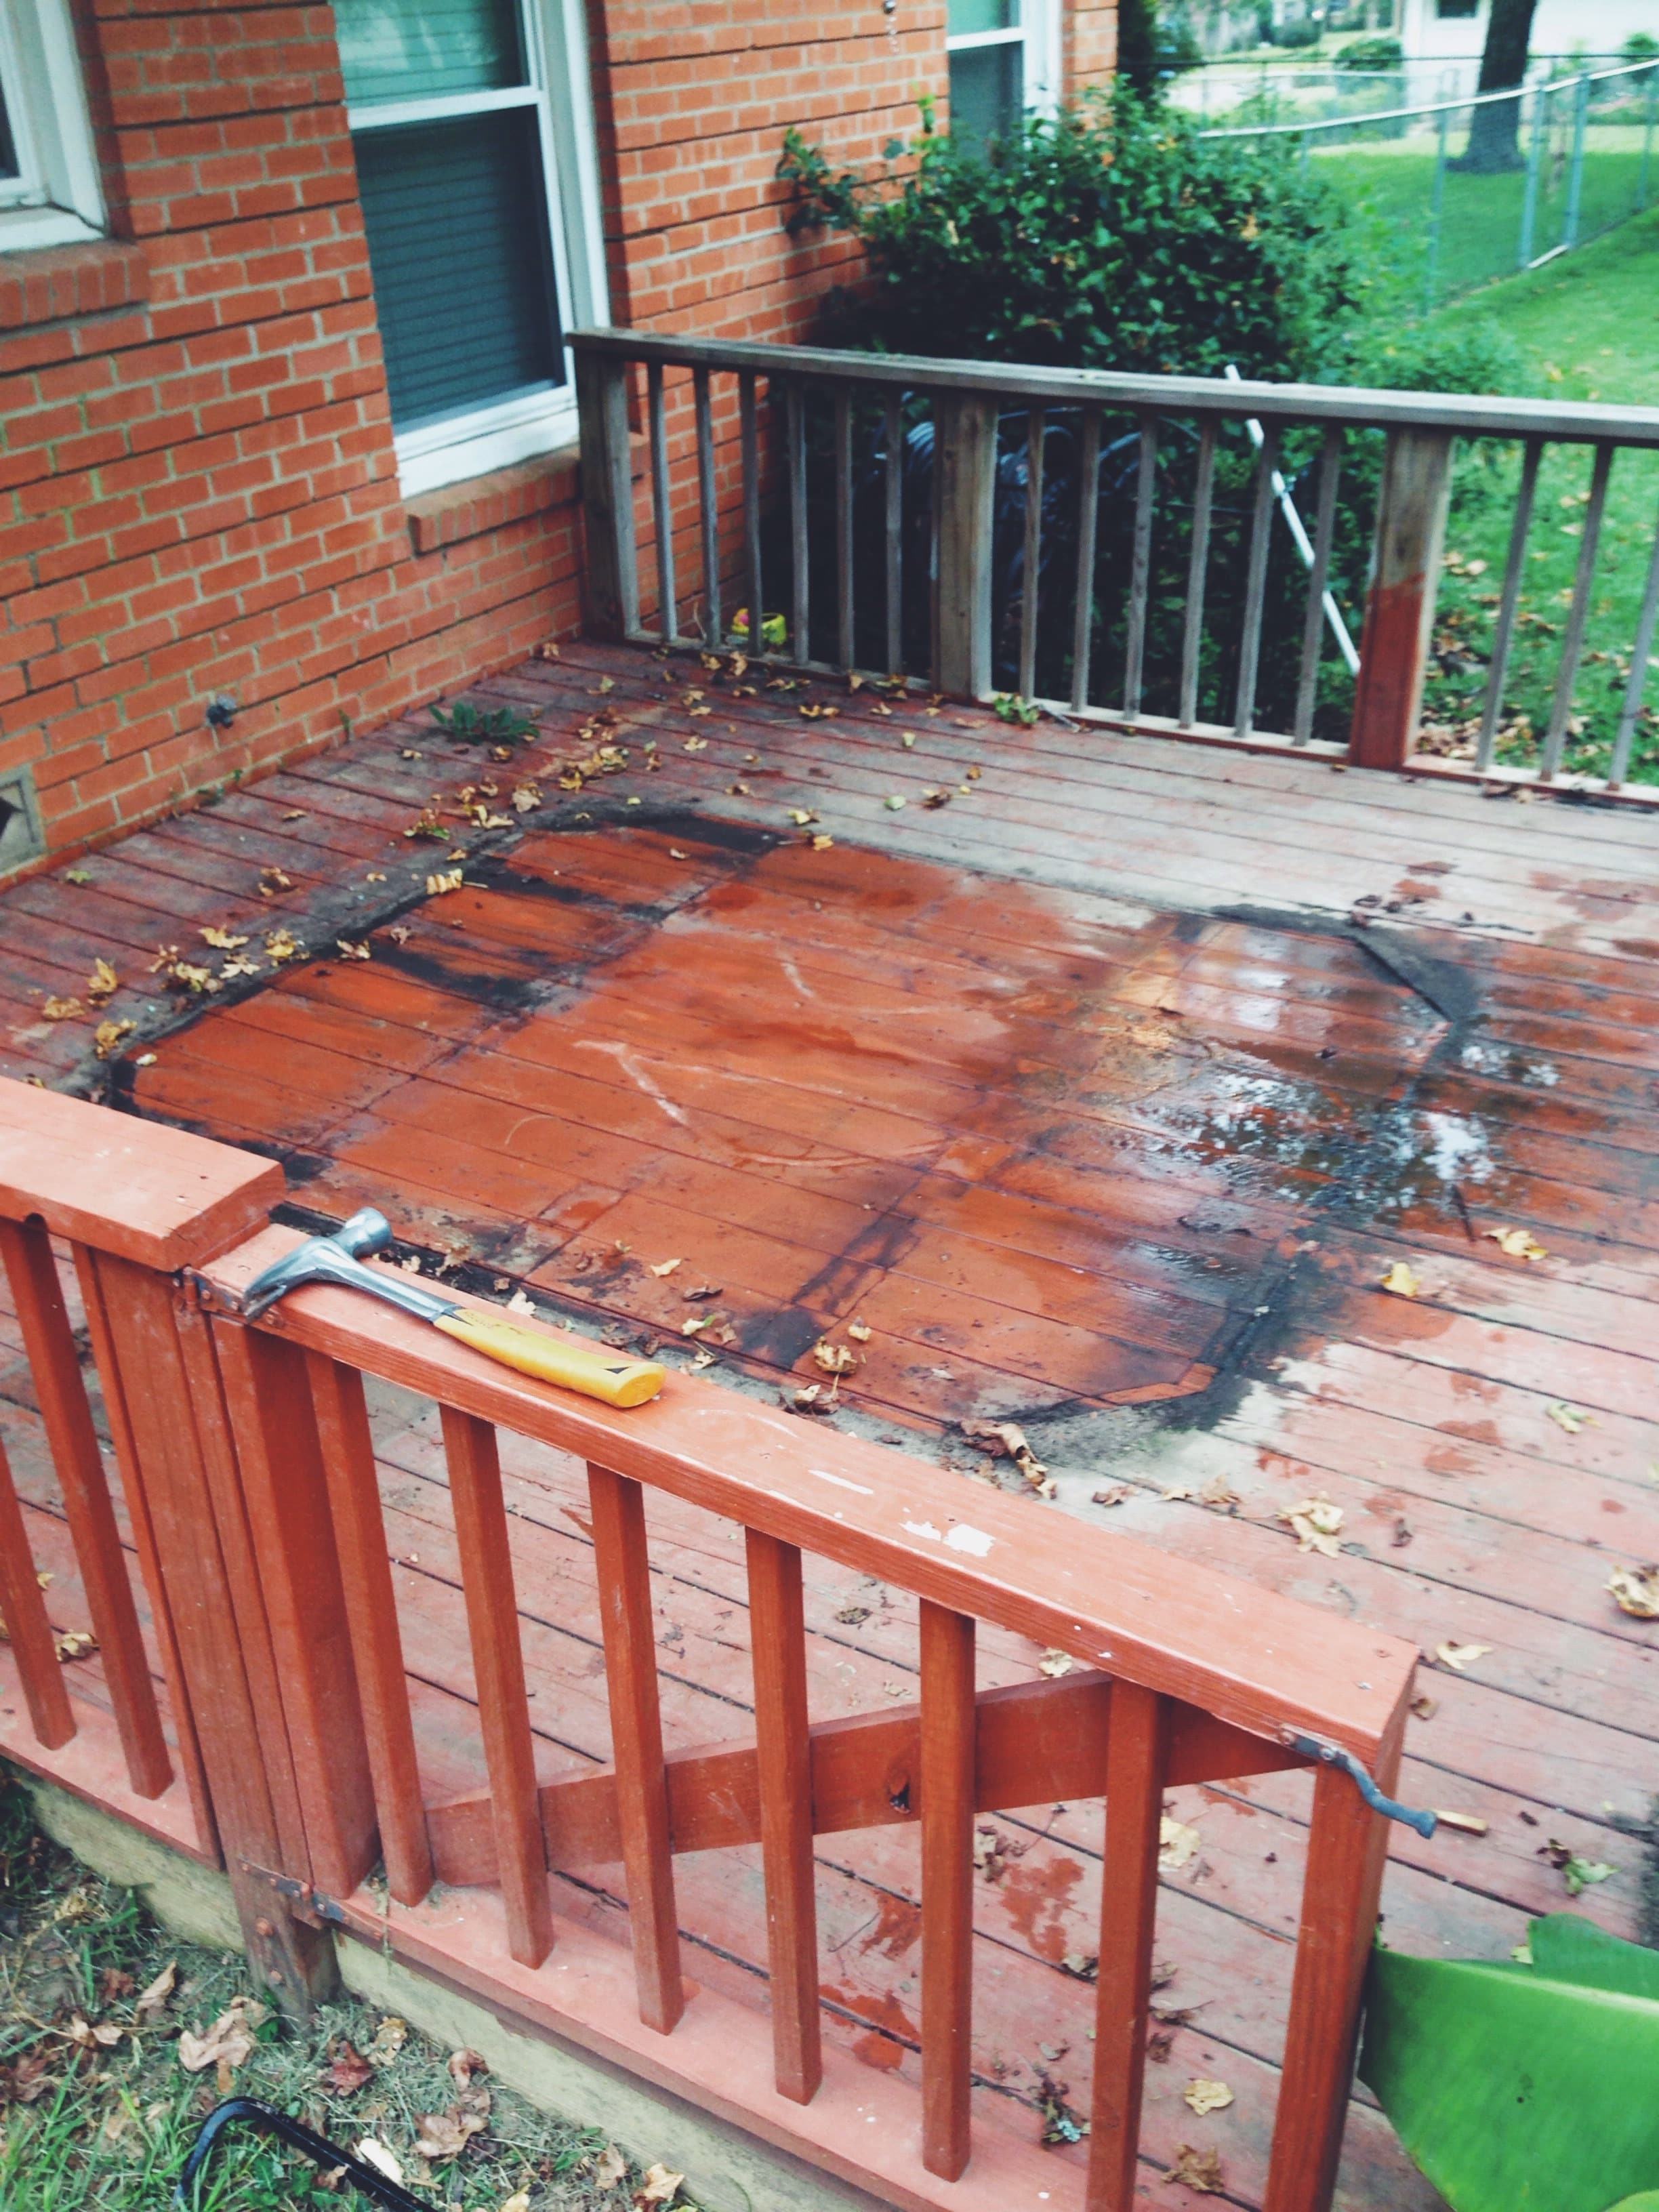 Old hot tub deck ready to be taken apart